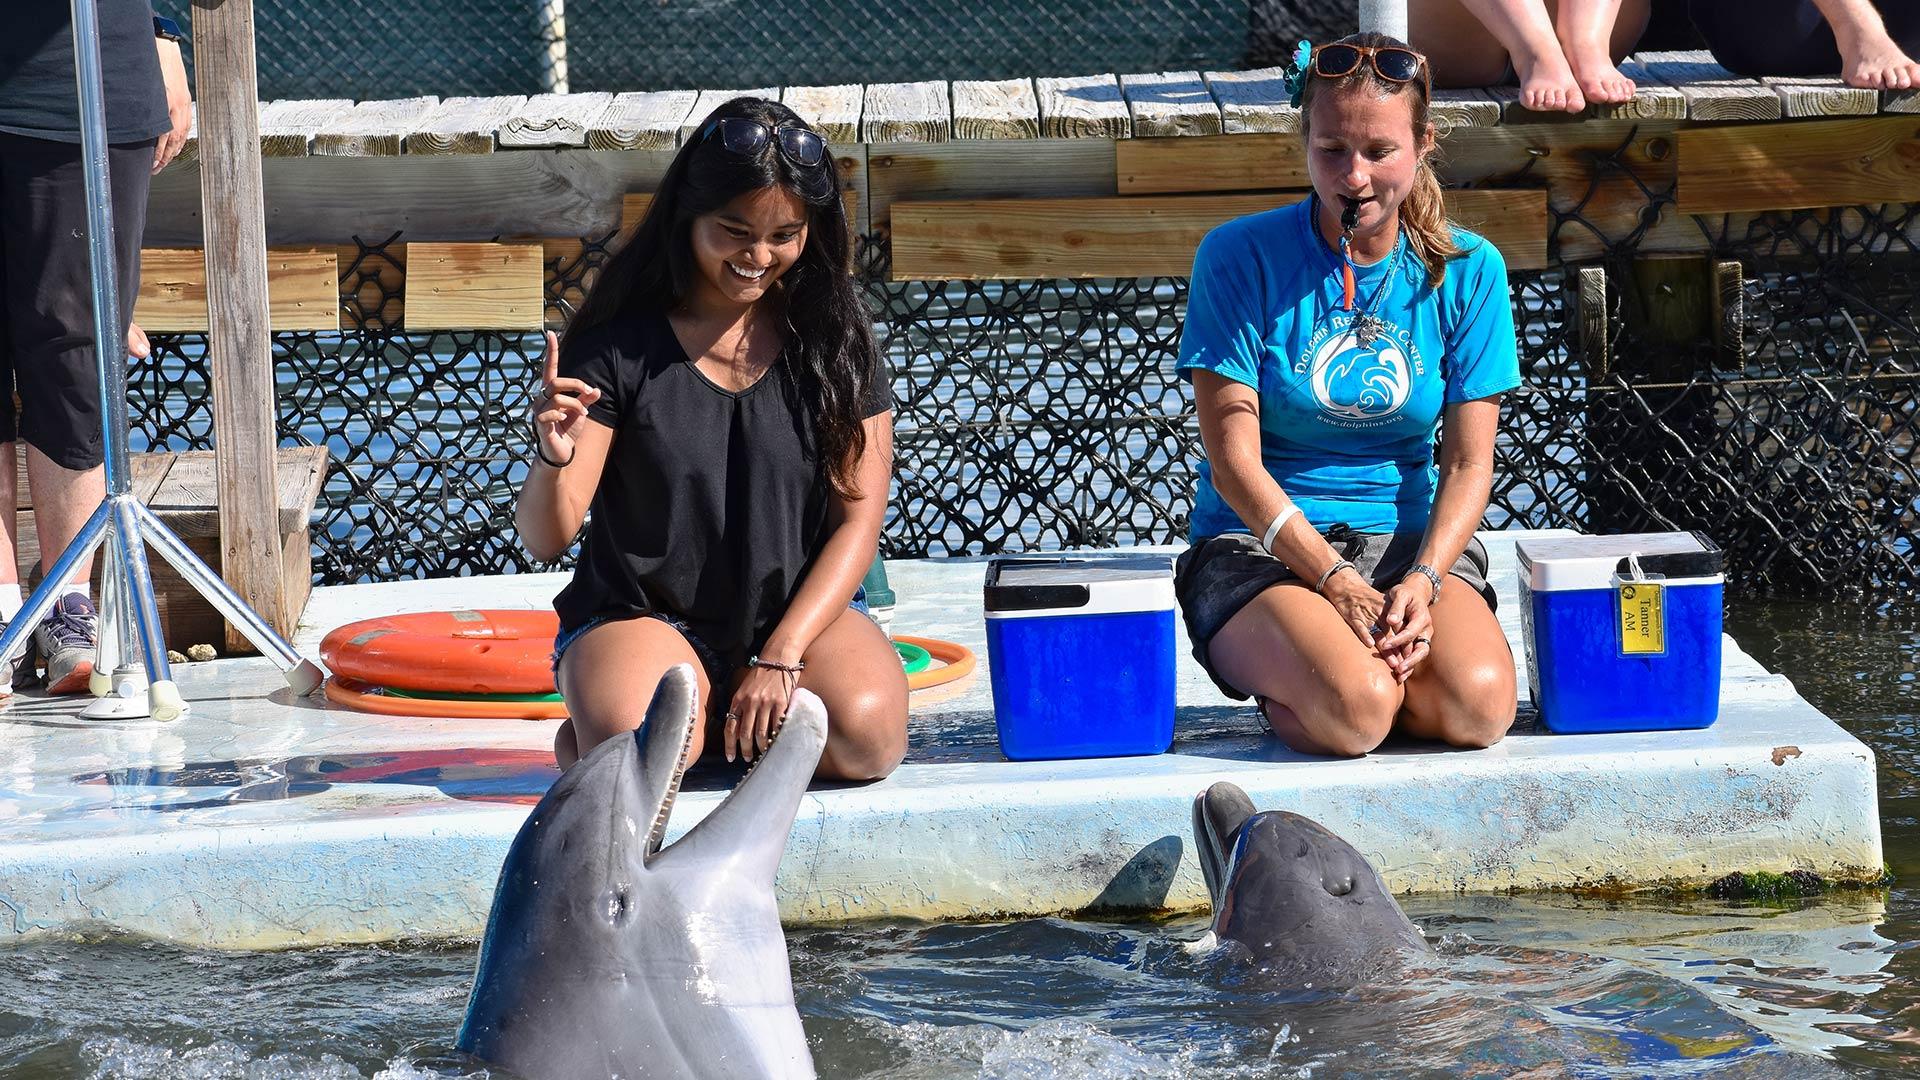 A student holds up a finger while kneeling near the water, where a dolphin responds.